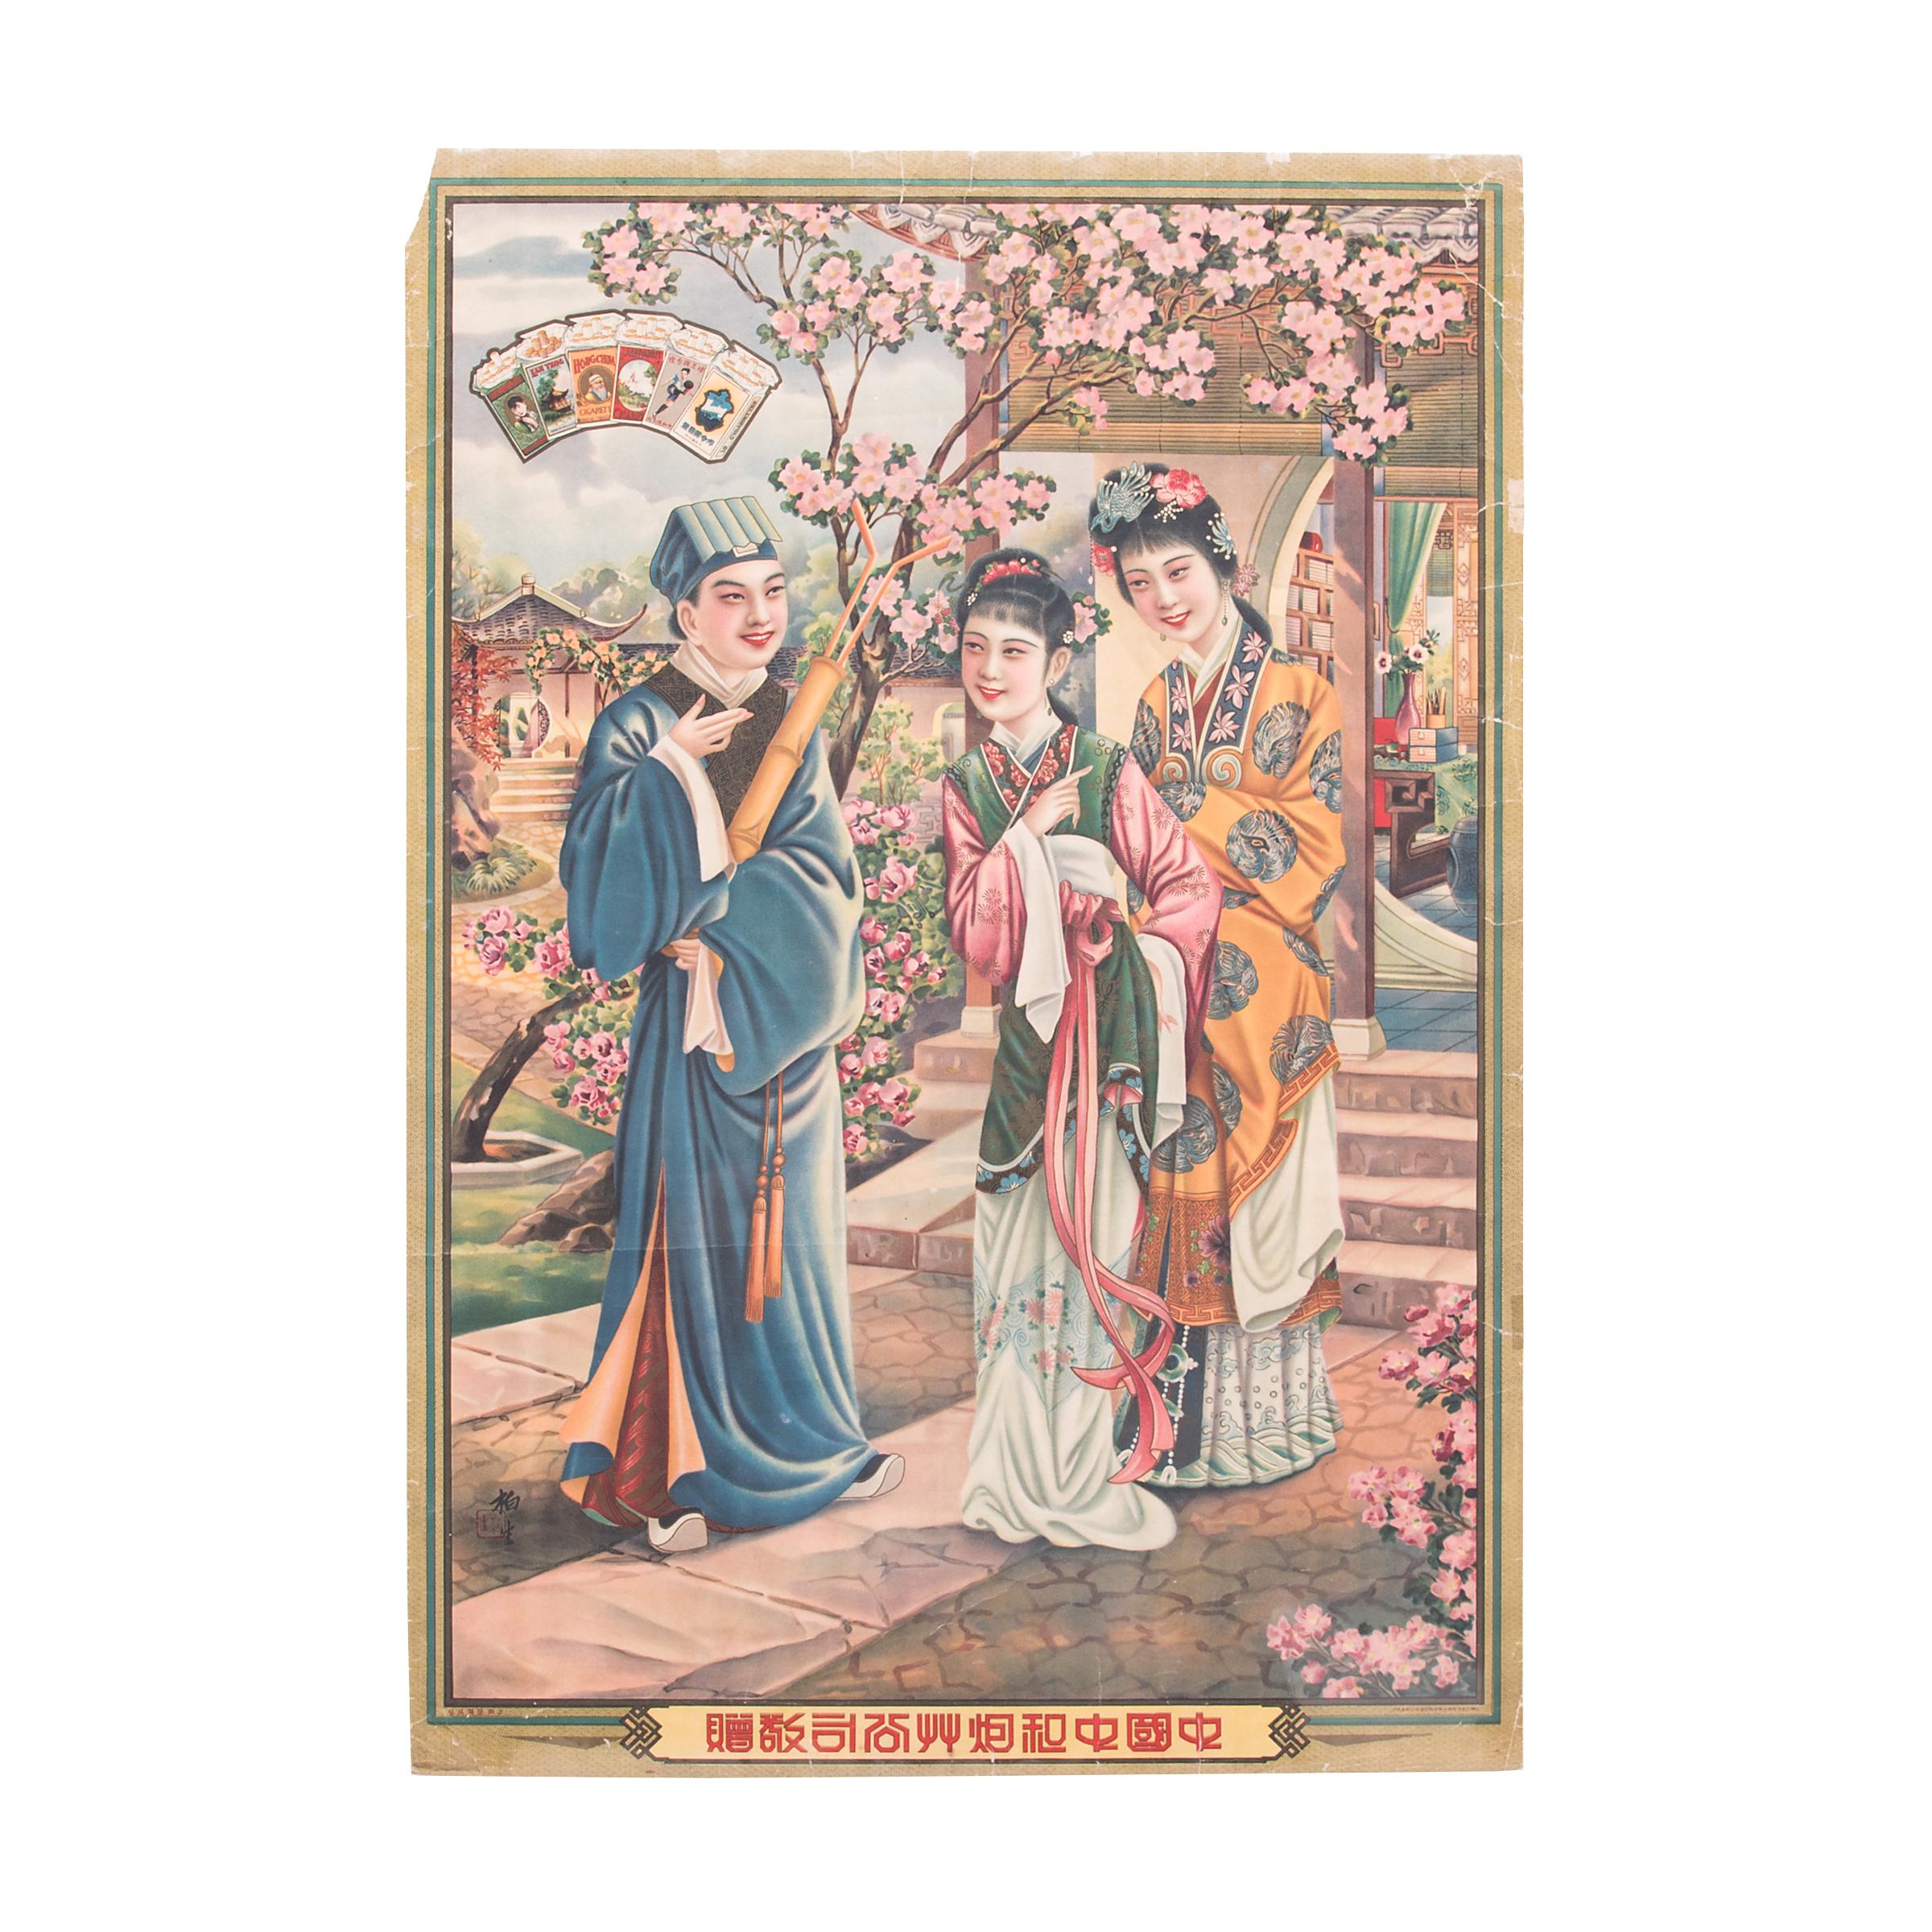 Unknown Figurative Art - Vintage Chinese Cigarette Advertisement Poster, c. 1930